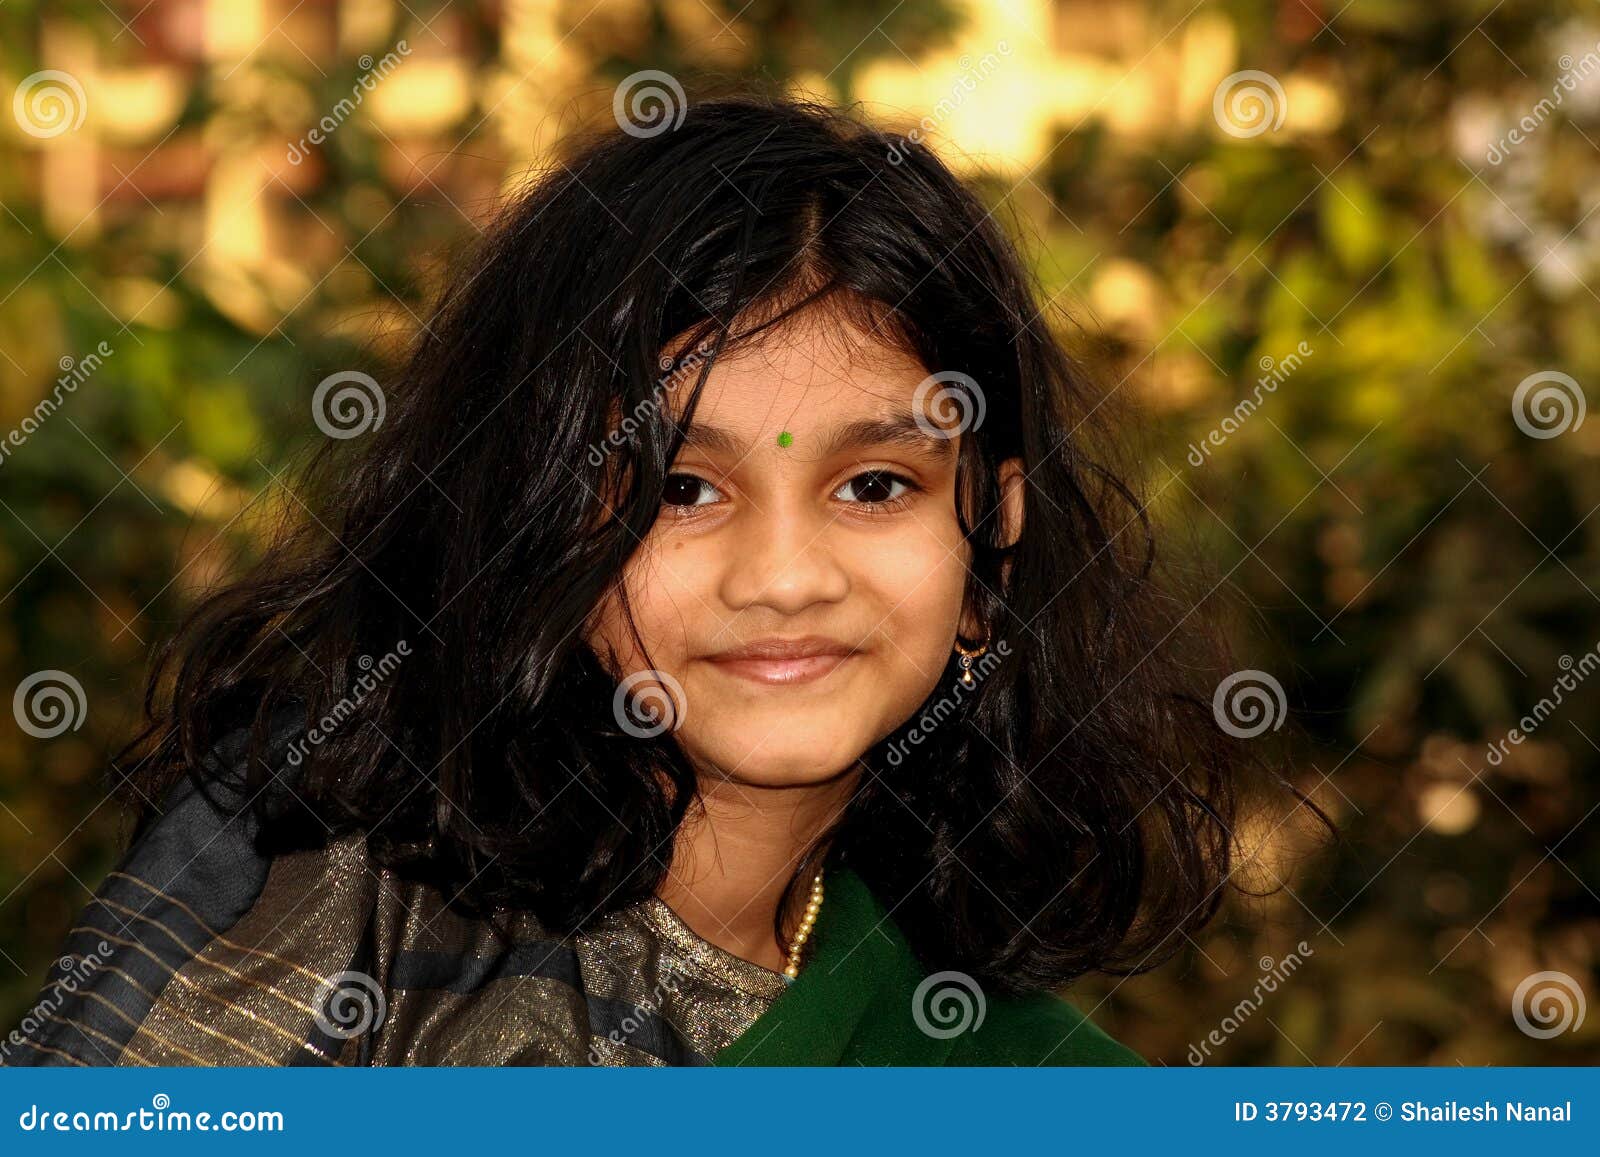 Free Photos - A Young, Smiling Girl With Curly Hair, Sitting On The Grass  And Wearing Traditional Indian Jewelry. She Appears To Be In A Happy And  Playful Mood, Possibly Enjoying An